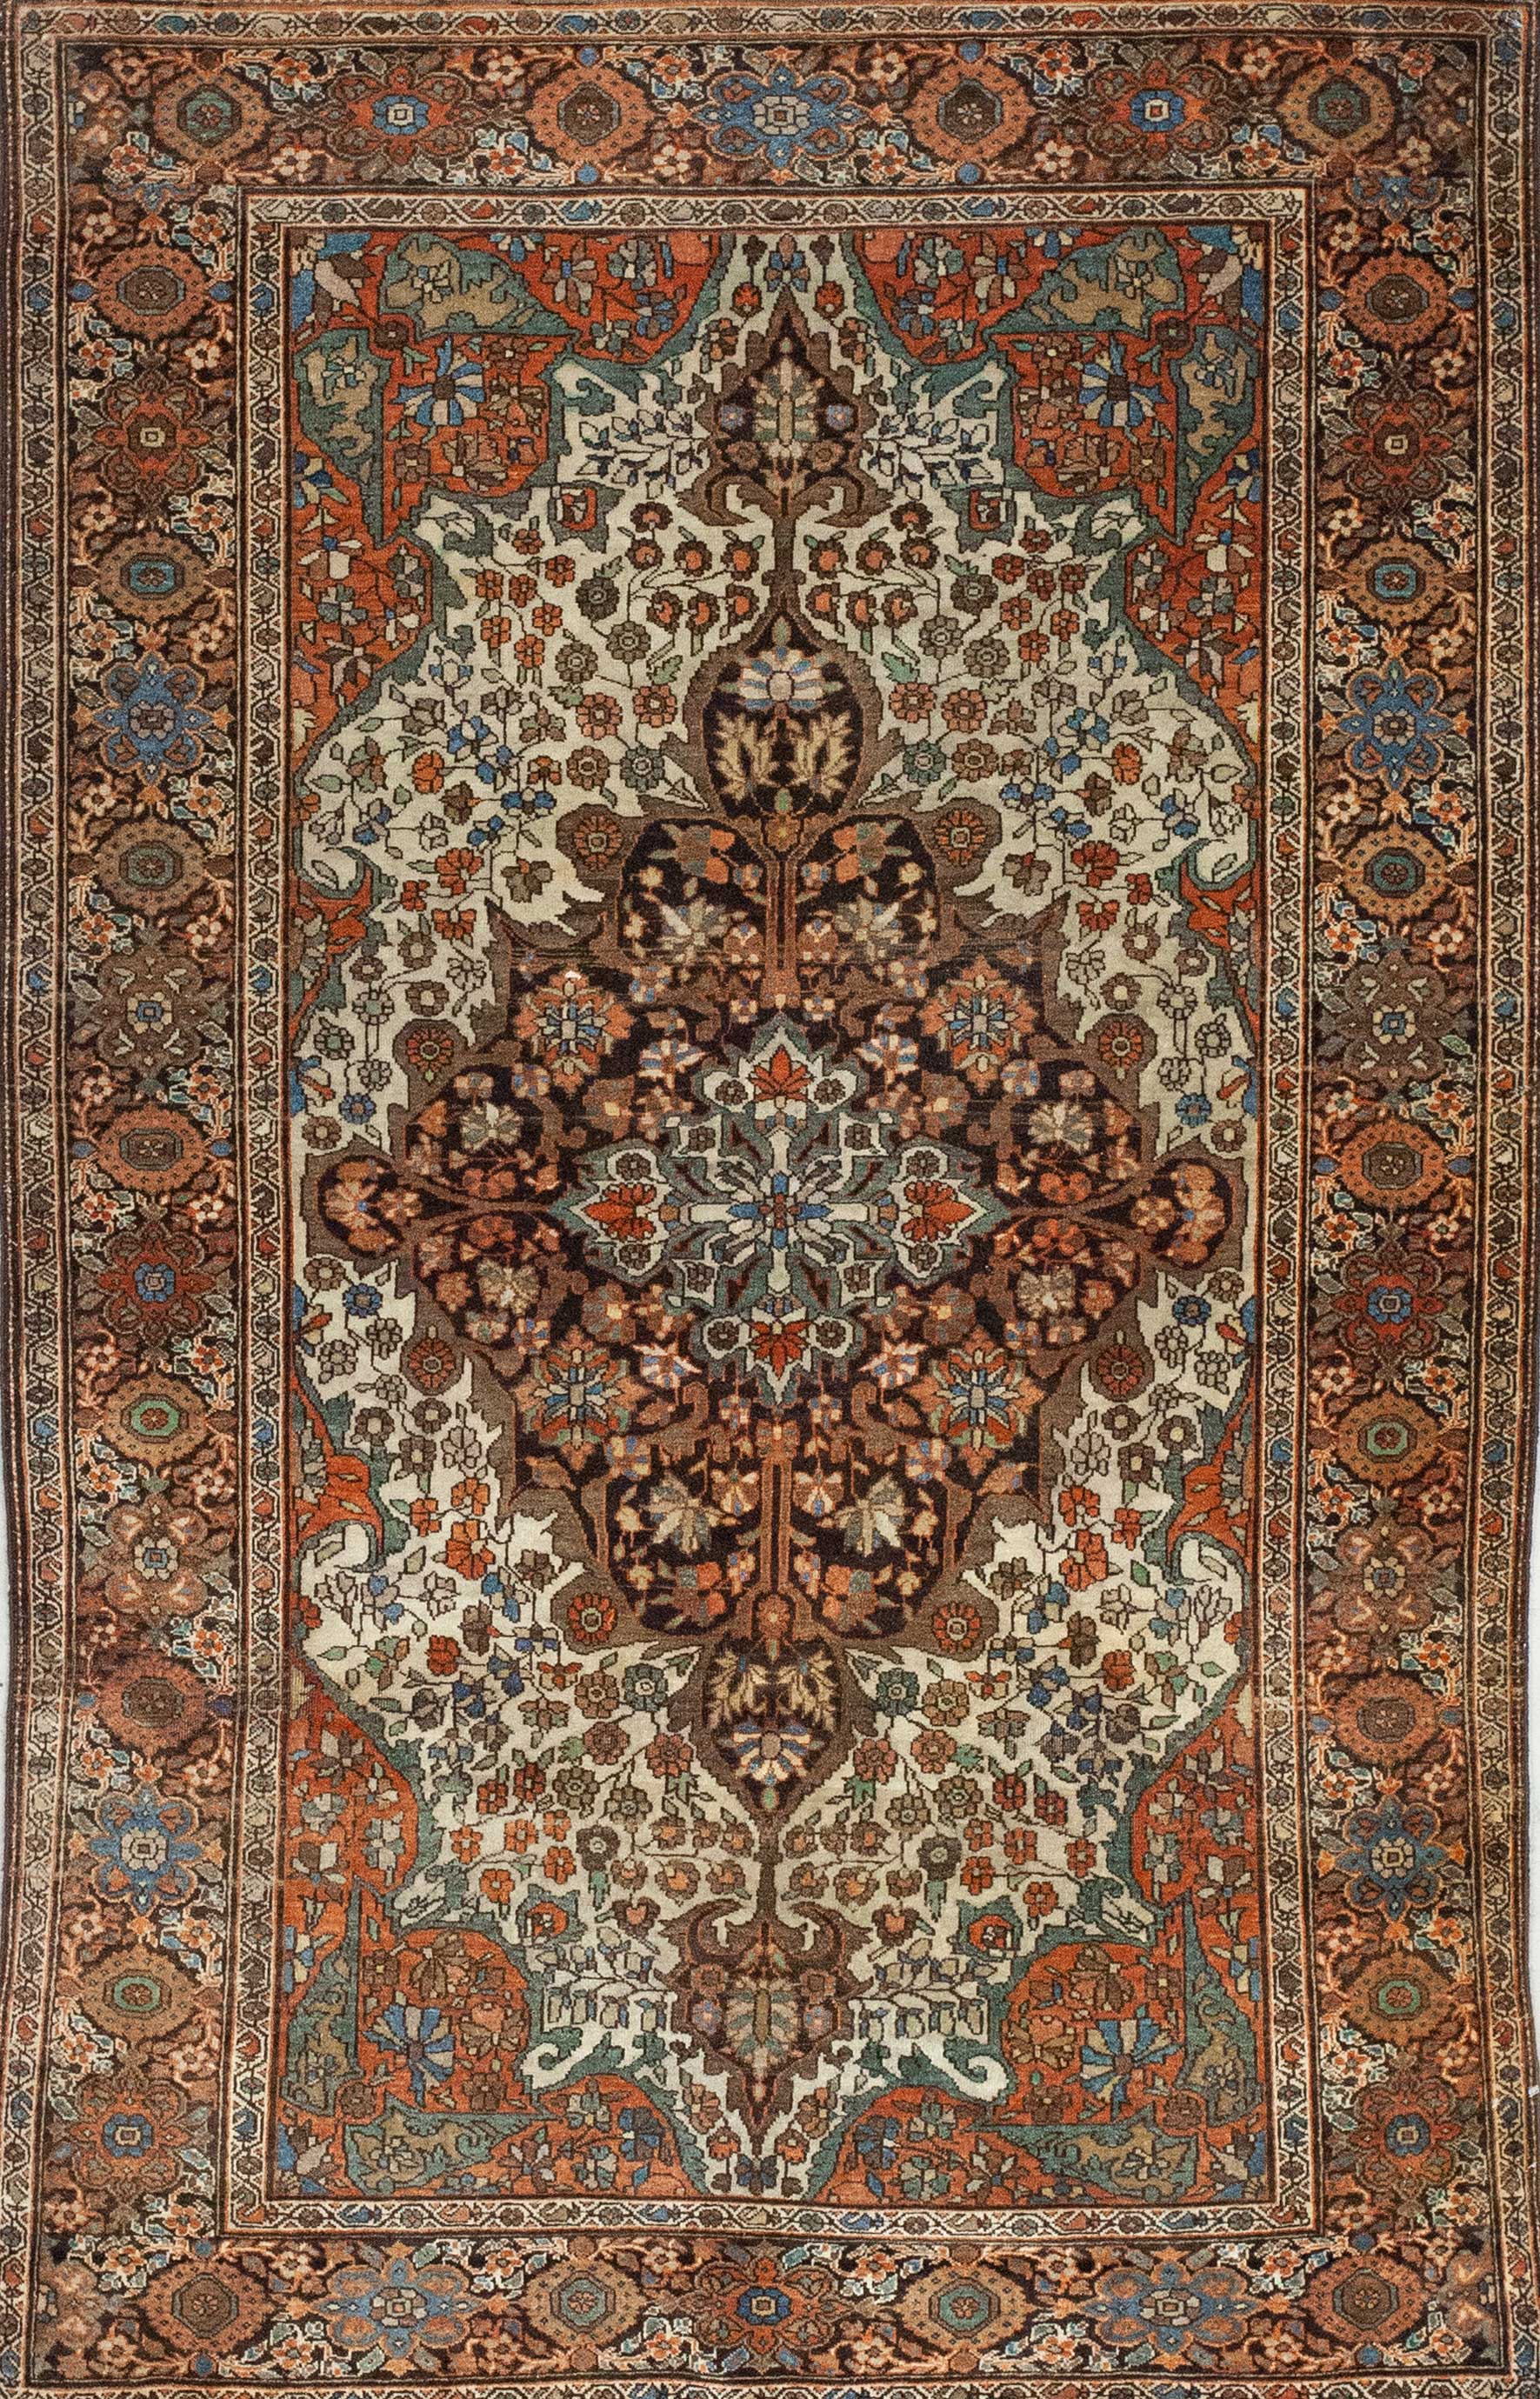 This rug is a treasure from the Iran collection. 